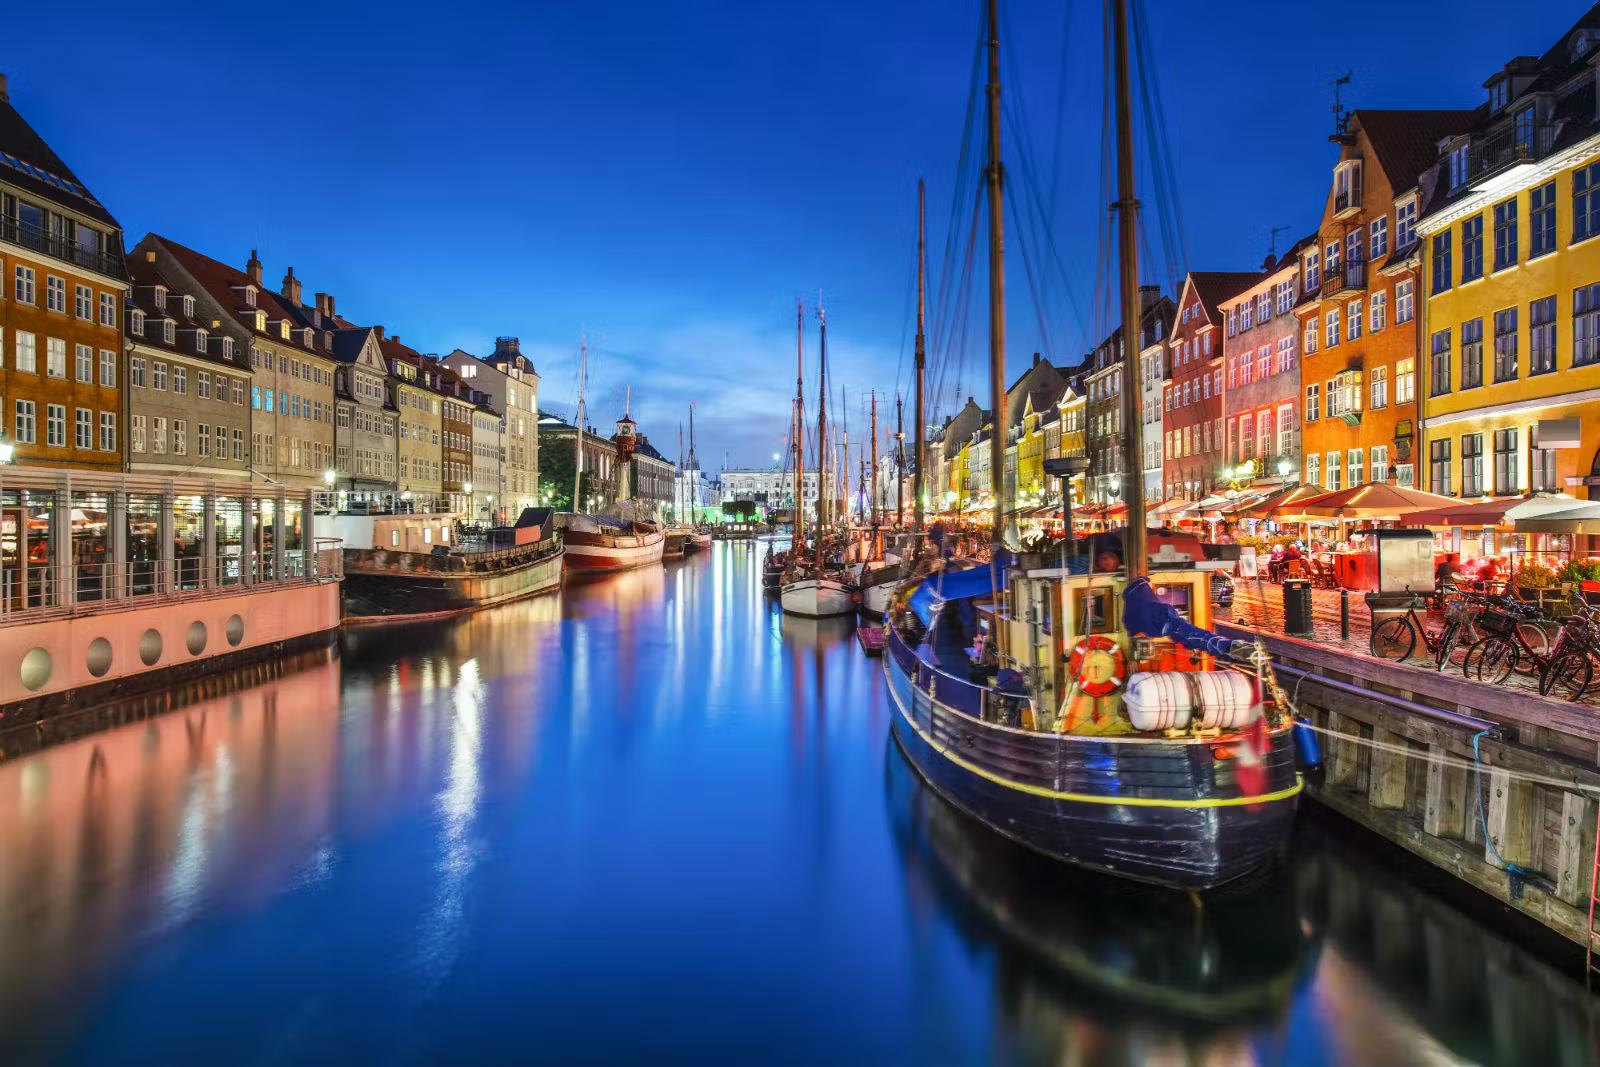 Colourful Nyhavn at night - tall ships and colourful buildings line the river as well as market stalls and parked bicycles